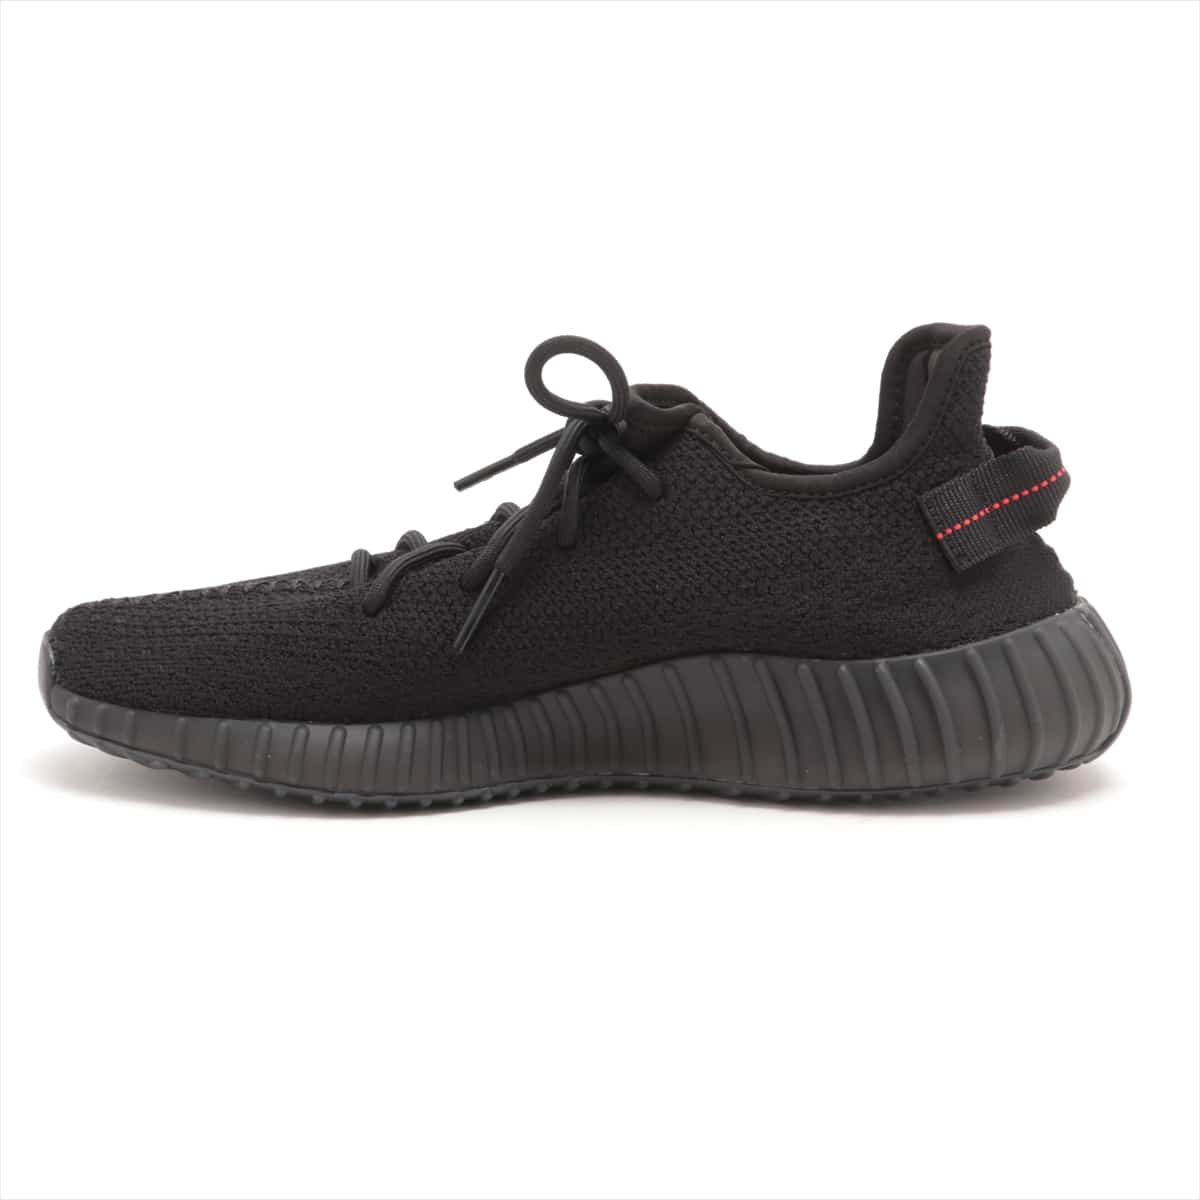 Adidas YEEZY BOOST 350 V2 Knit Sneakers 29cm Men's Black CP9652